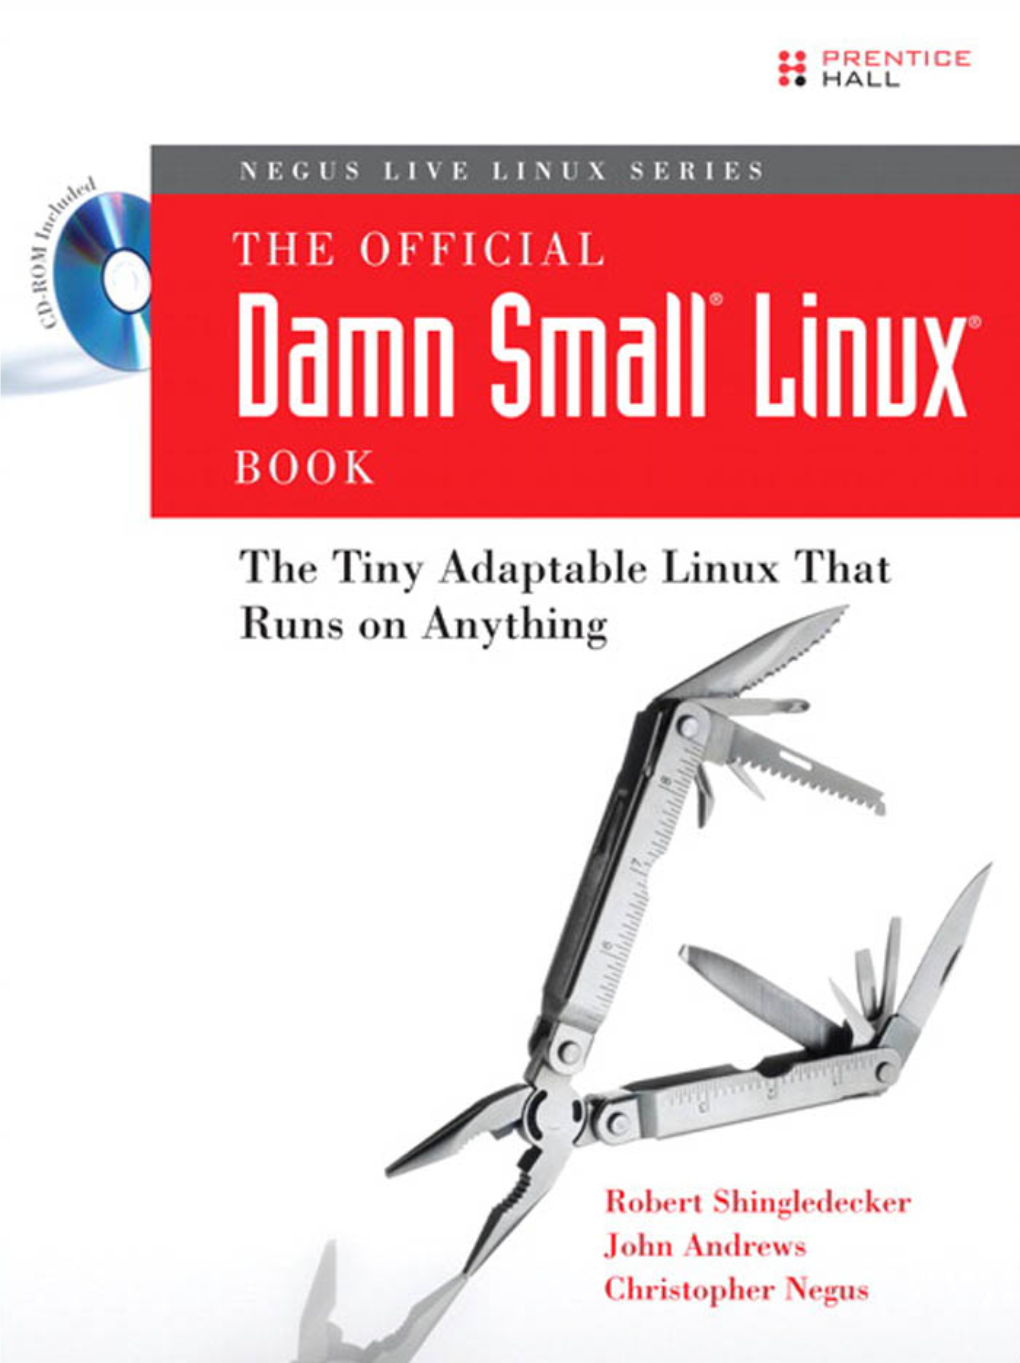 The Official Damn Small Linux® Book NEGUS LIVE LINUX SERIES